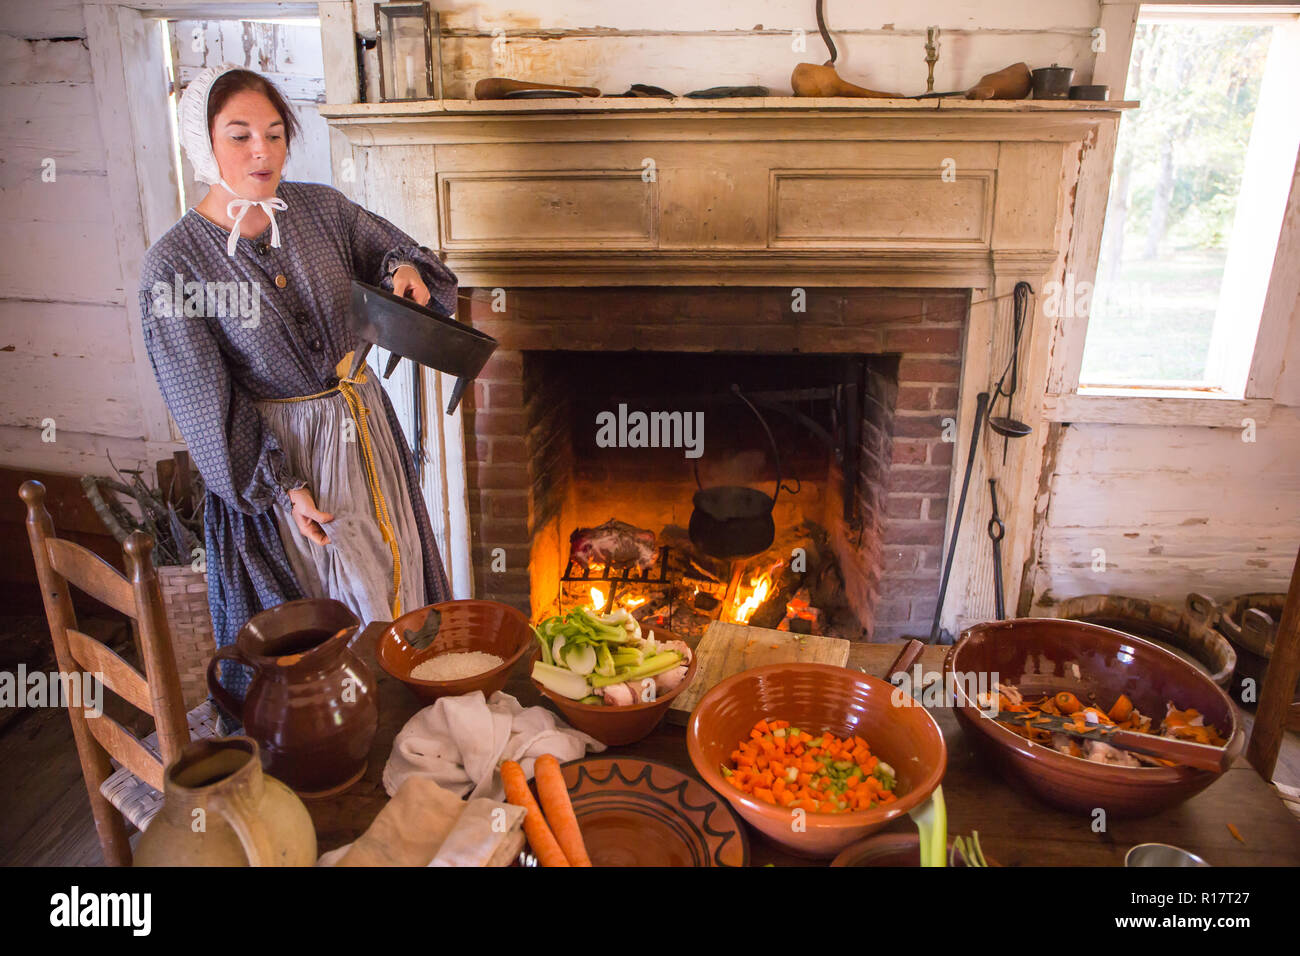 MCCONNELLS, SC (USA) - November 3, 2018:  A reenactor demonstrates cooking in the antebellum South during a recreation of the American Civil War. Stock Photo